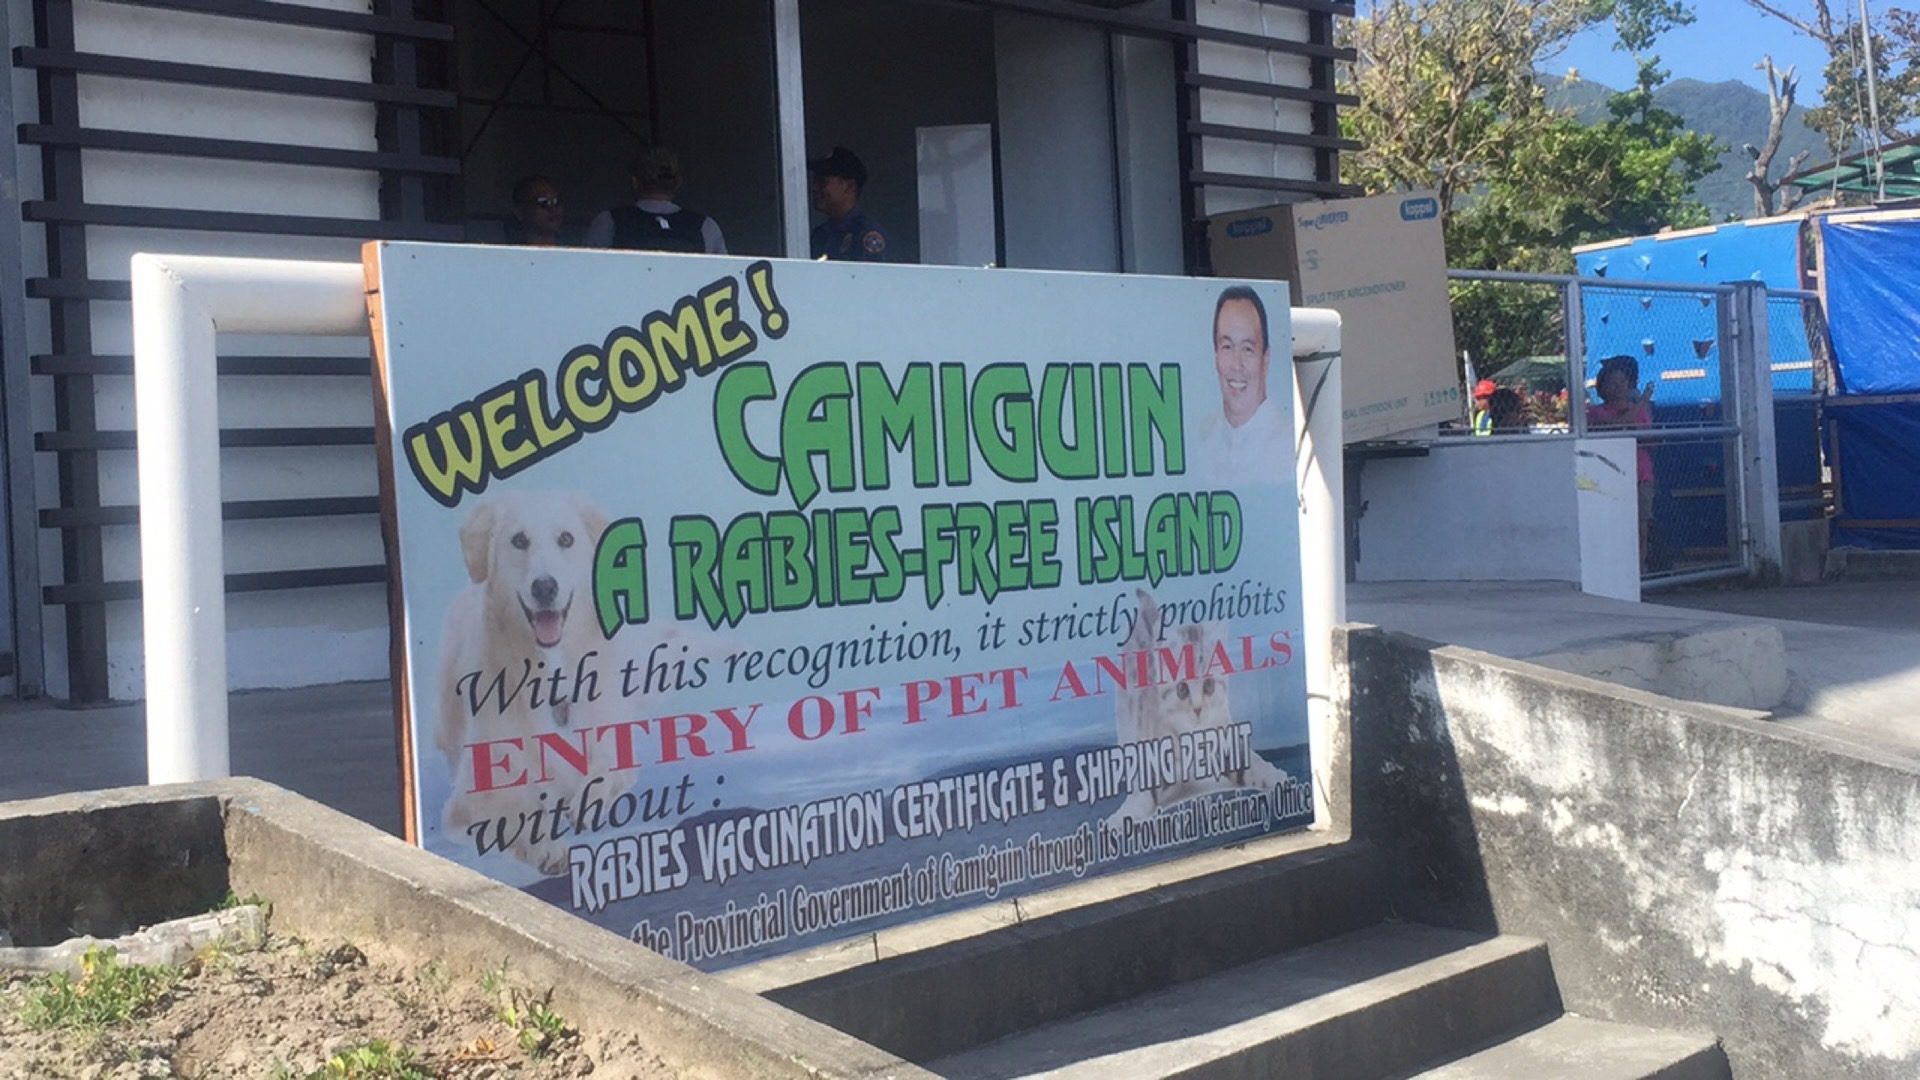 Anti-rabies sign in Camiguin, Philippines. White Island on Camiguin